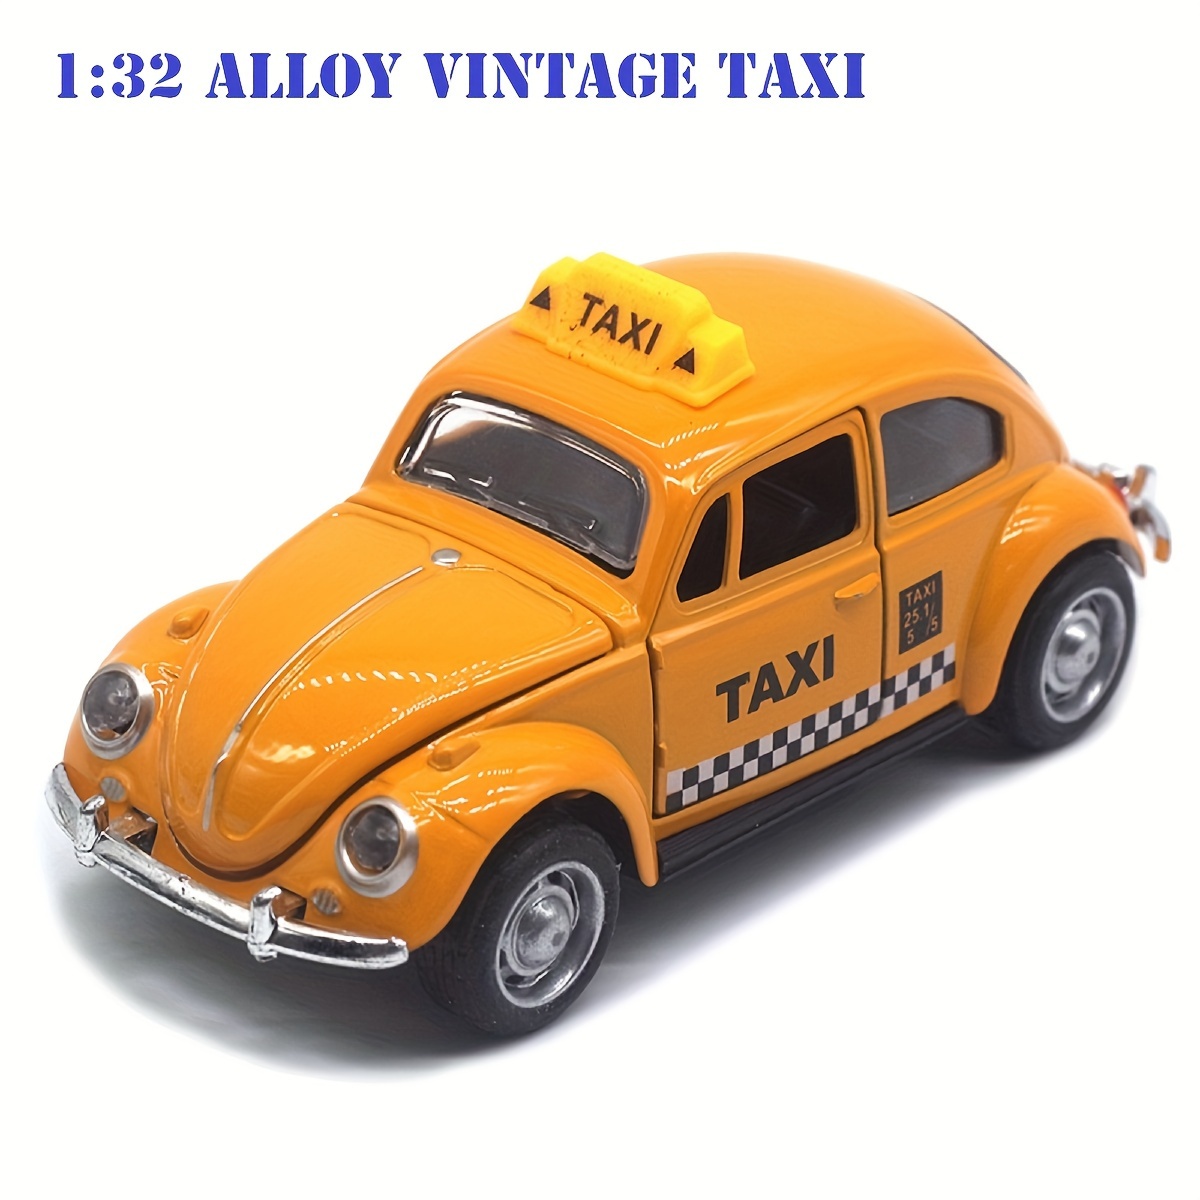 

Vintage Yellow Taxi Die-cast Model Toy - 1:32 Scale Pull Back Alloy Vehicle For Young Youngsters